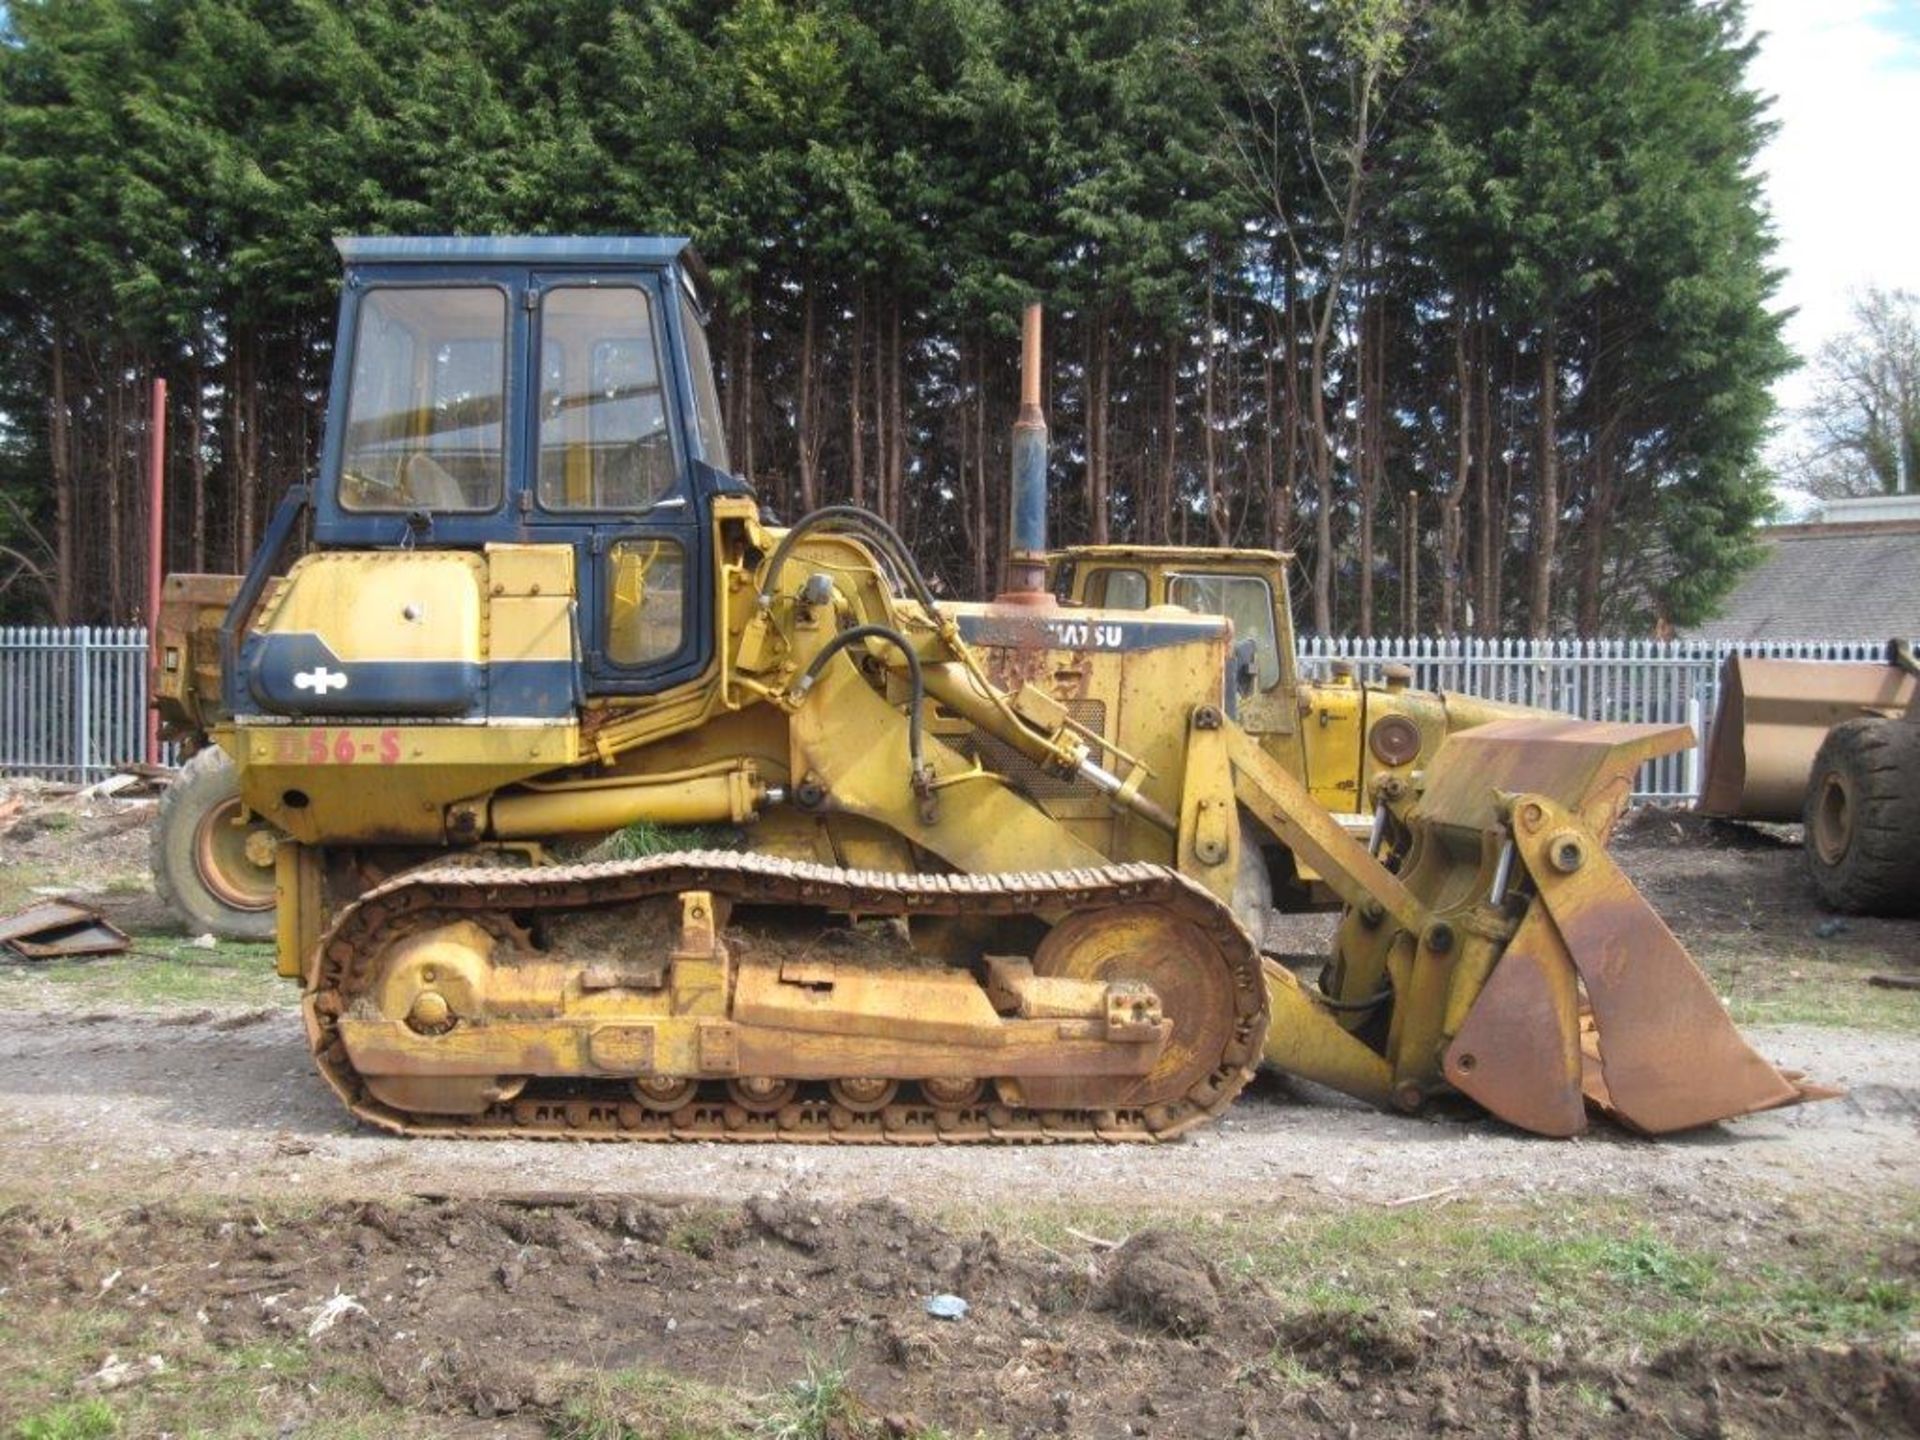 Komatsu Tracked Loading Shovel_x00D_
Good condition for age, 4 in 1 bucket with teeth and good